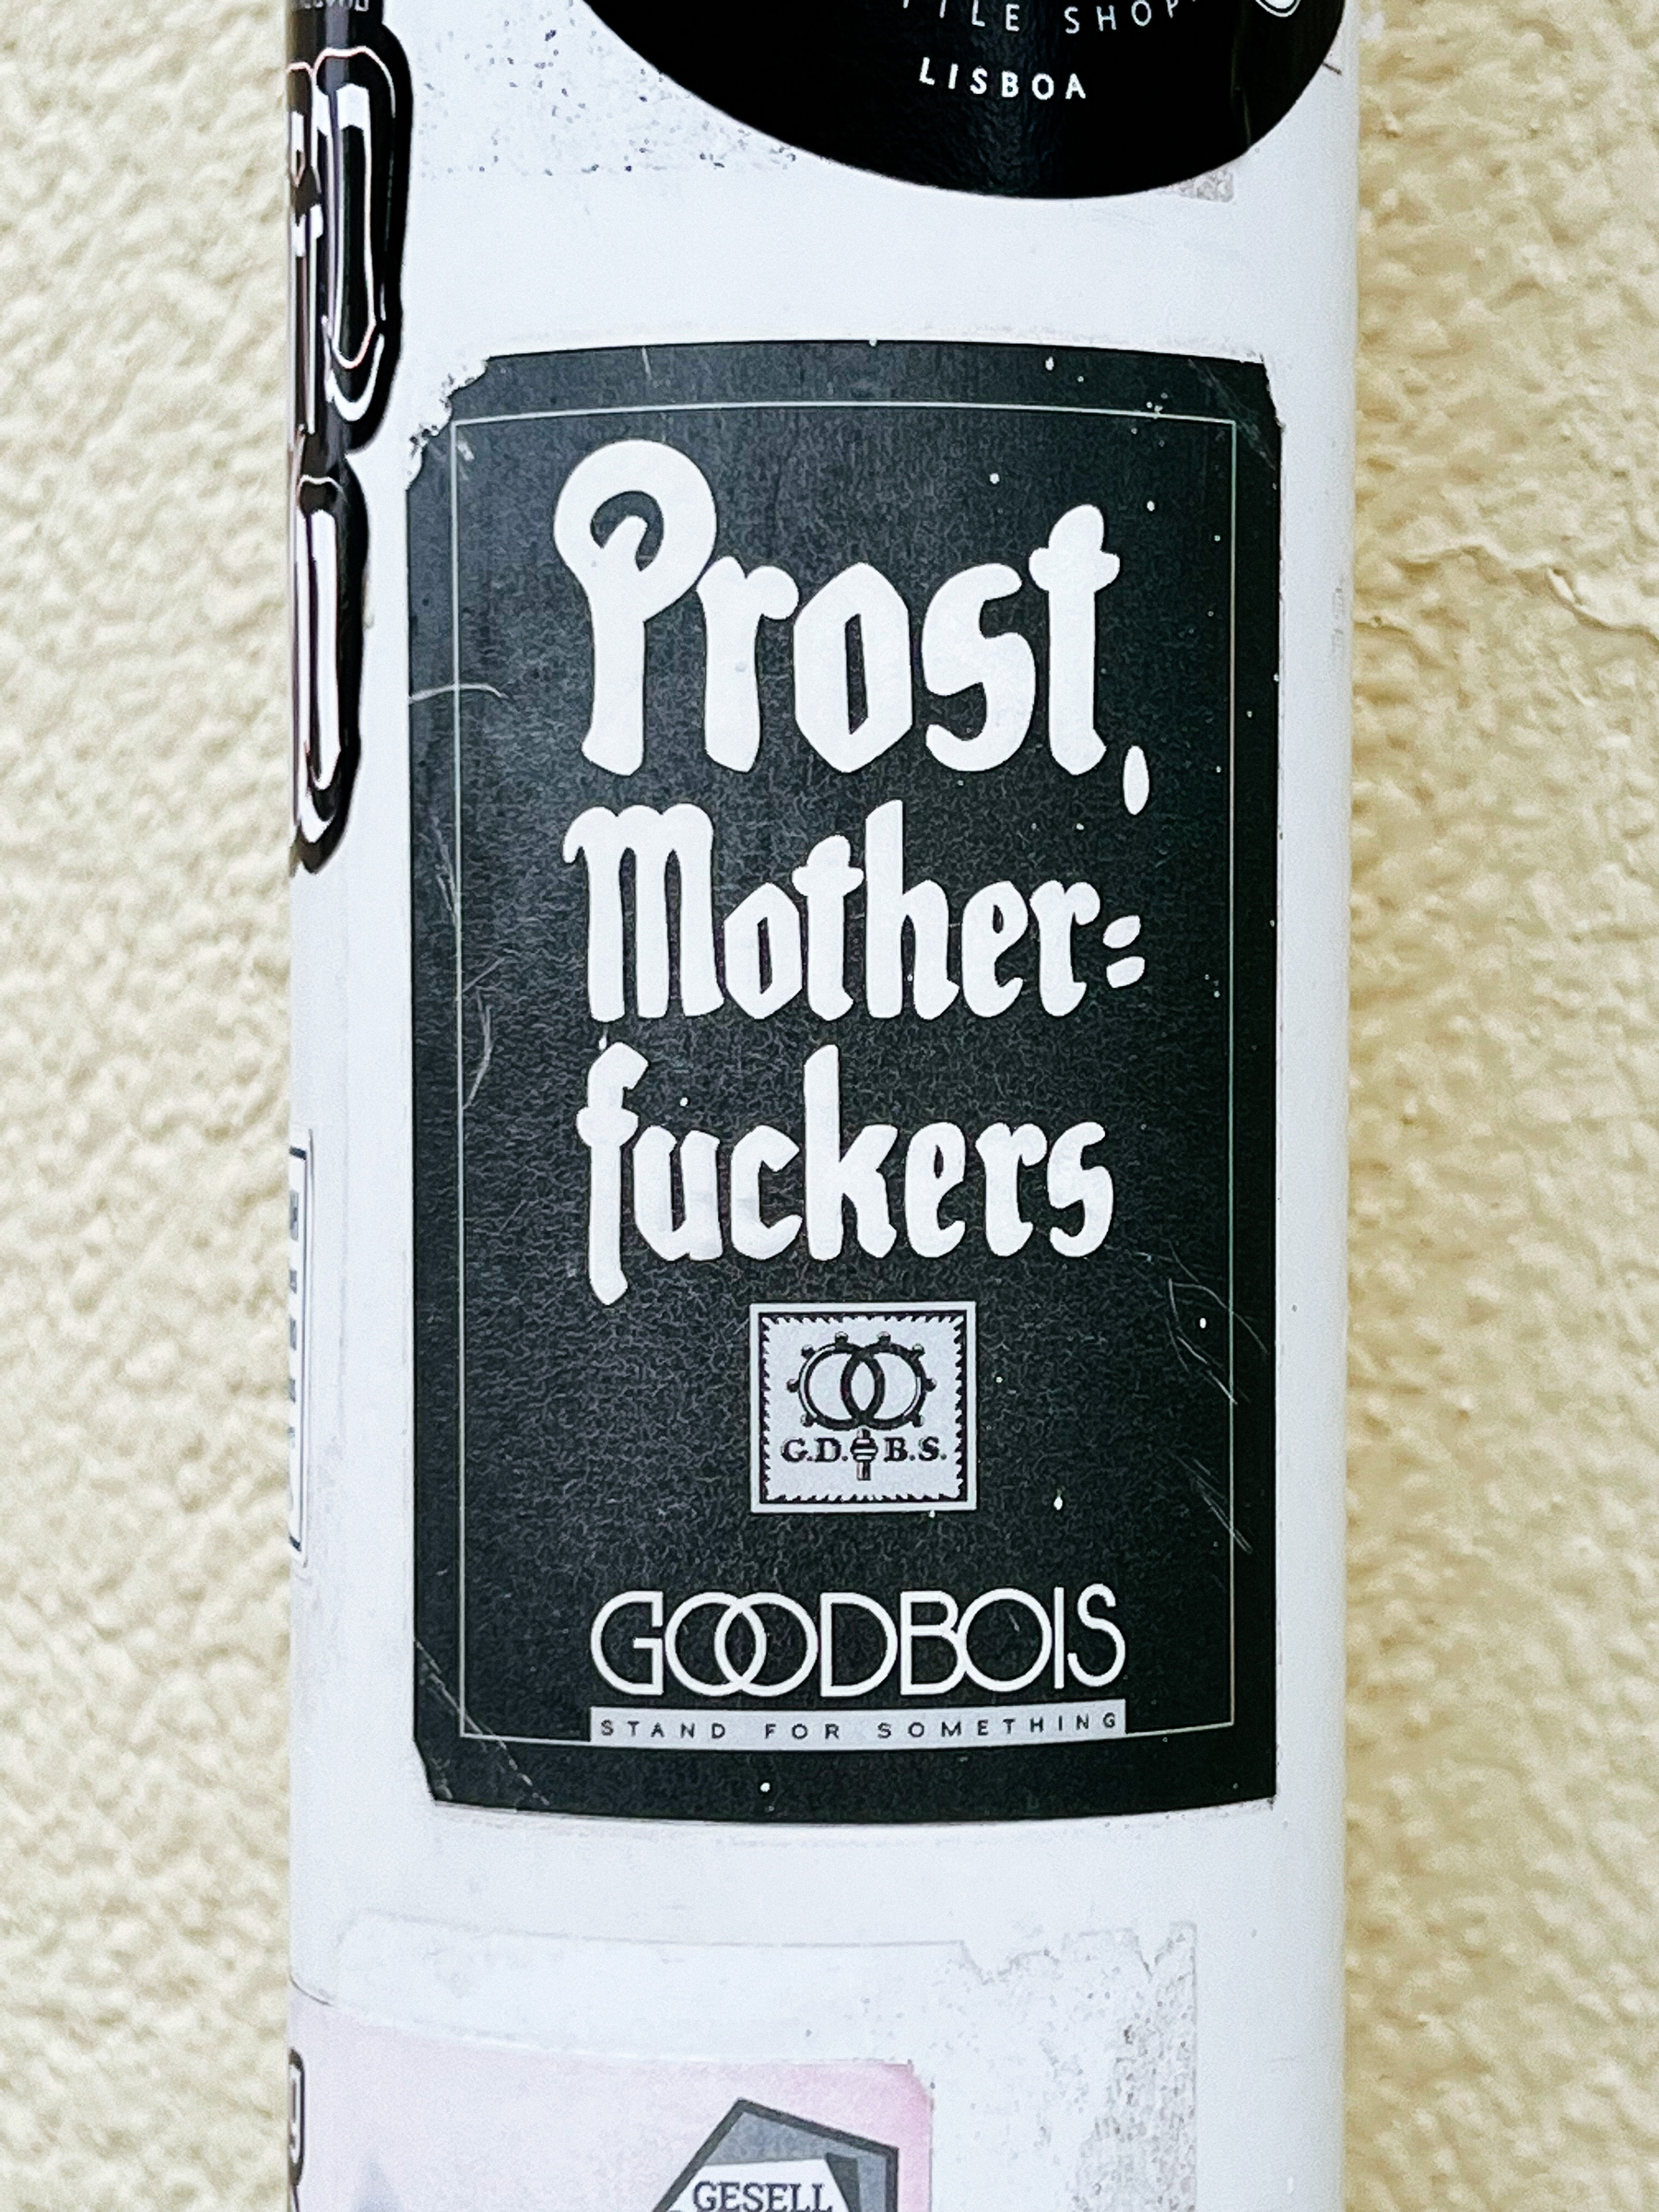 Sticker with the words “Prost, mother fuckers”. 